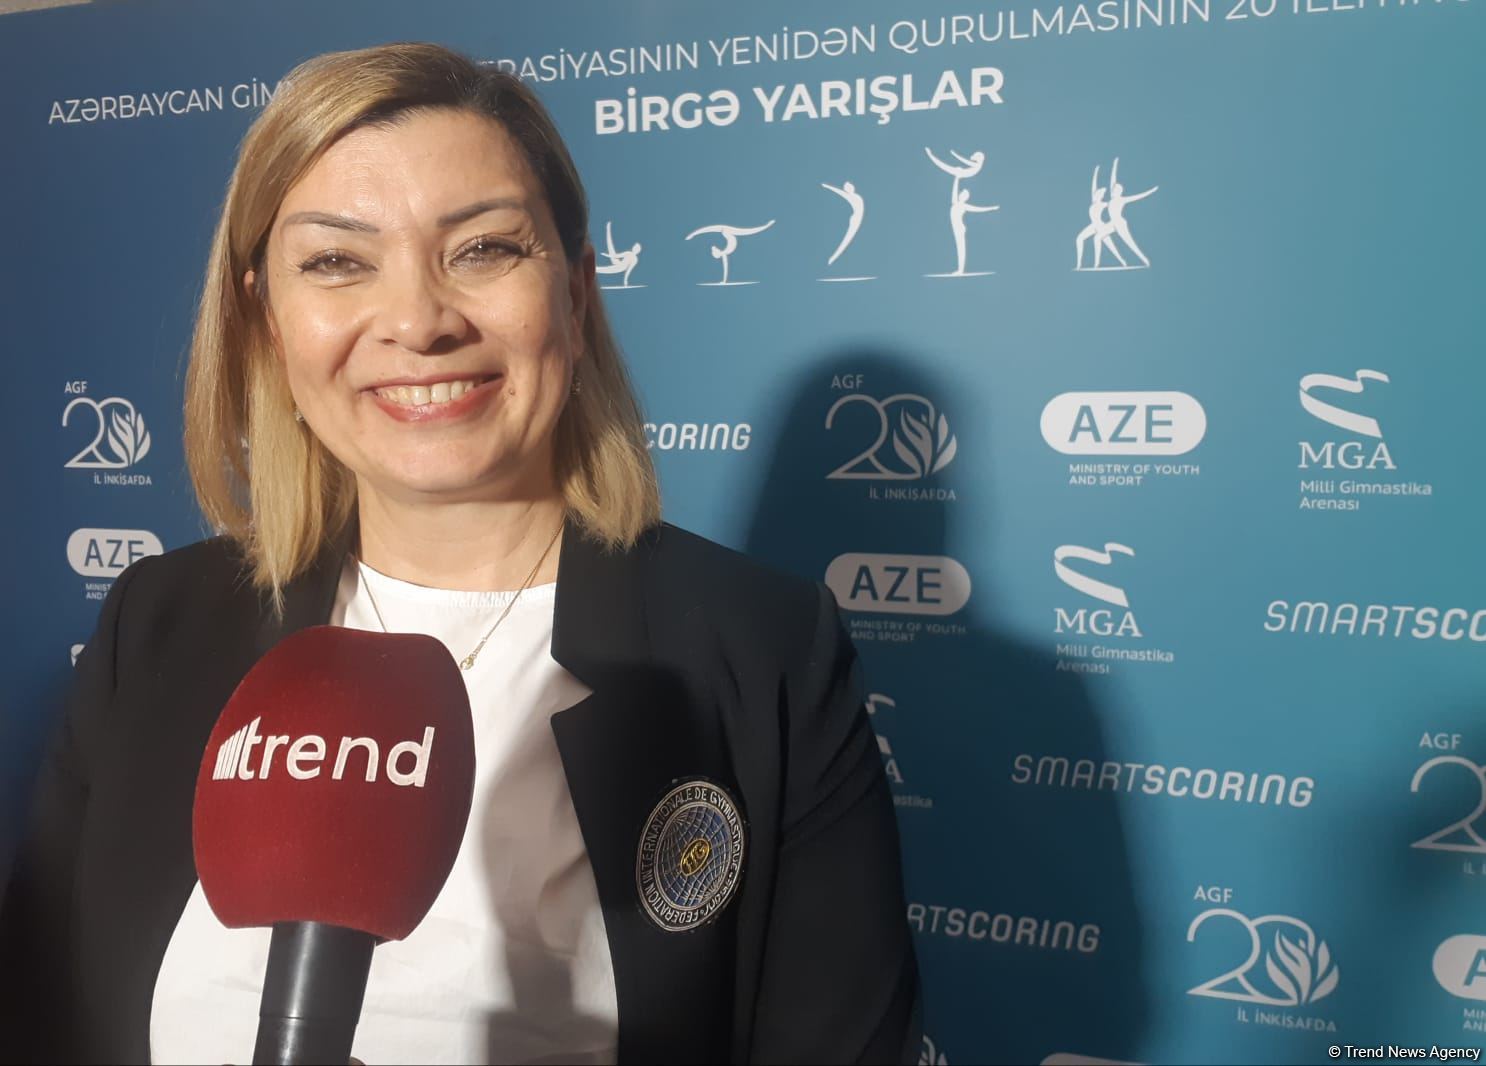 Head Coach of Azerbaijan national team calls atmosphere at gymnastics competitions 'friendly'